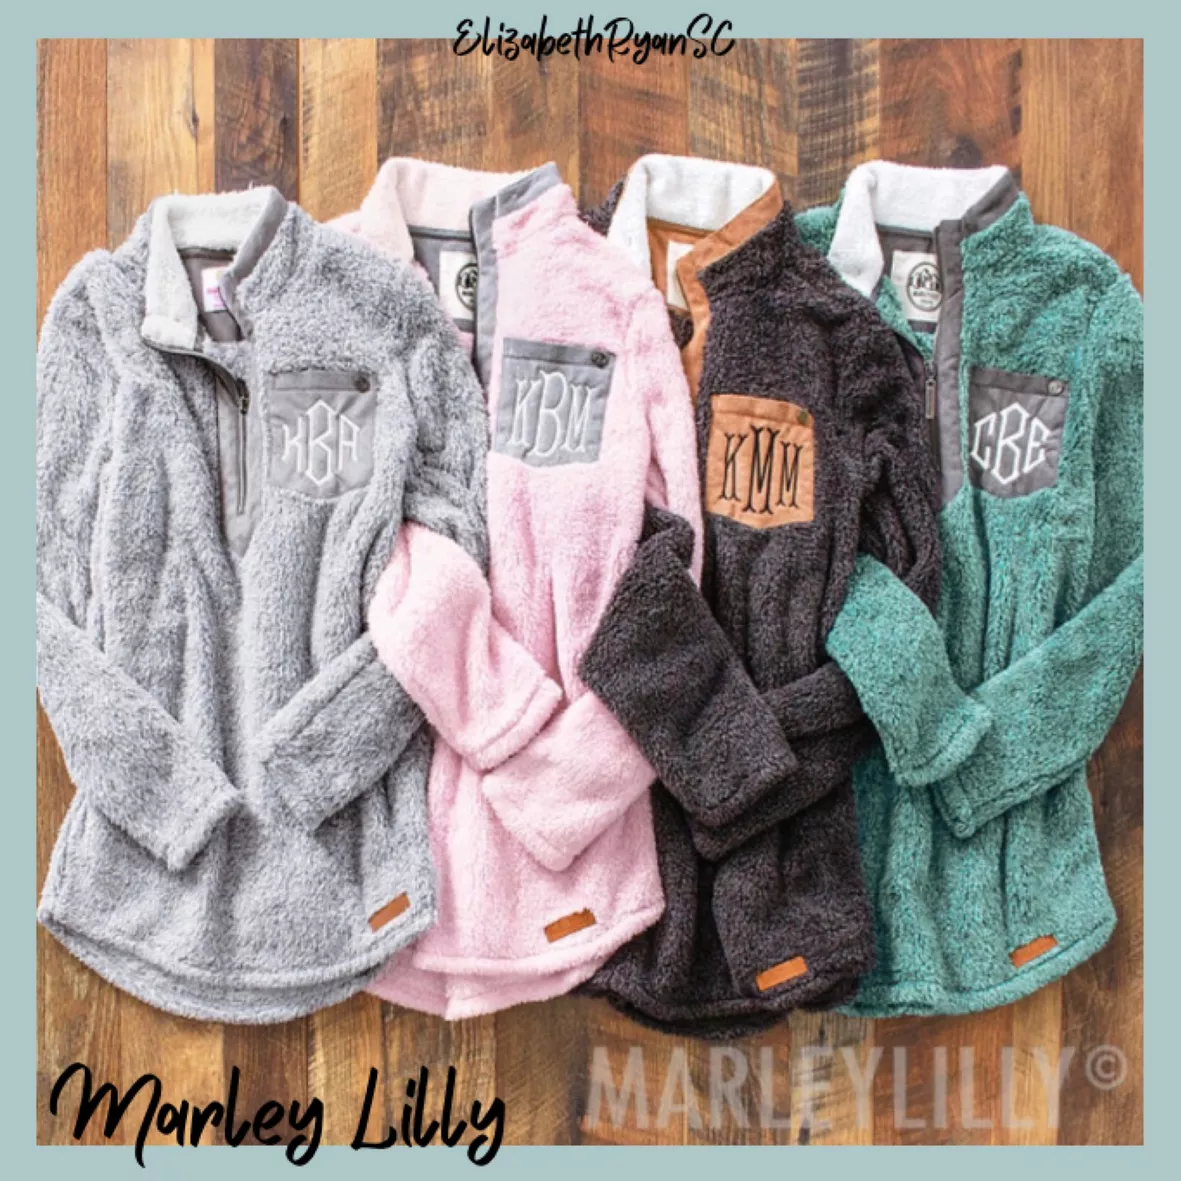 Monogrammed Sherpa Pullover